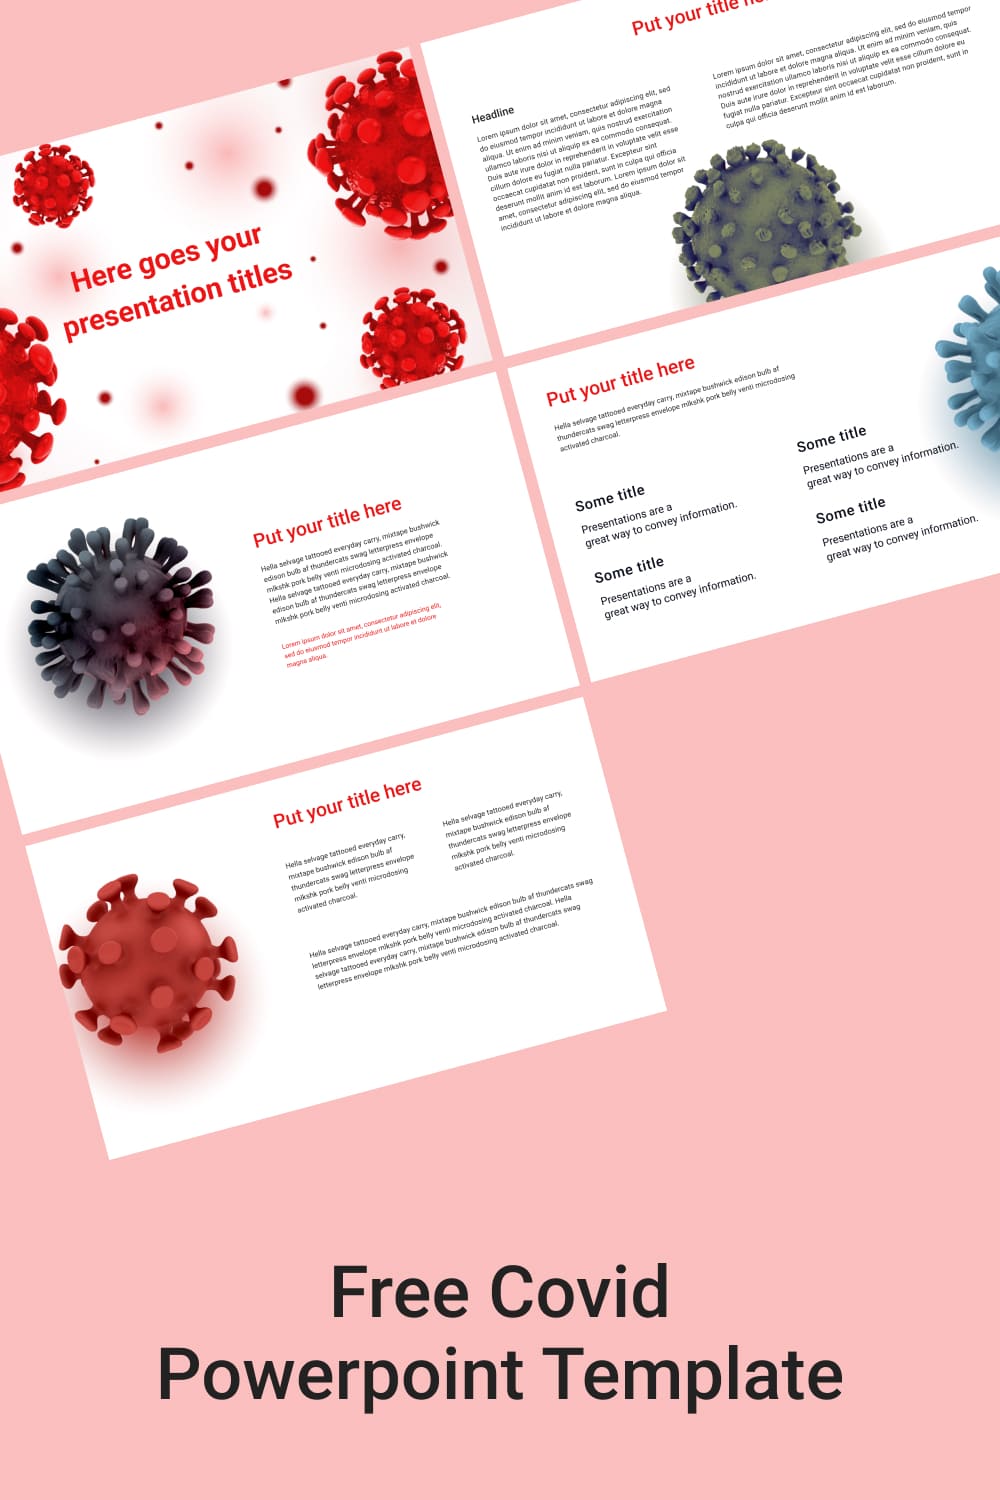 Pint Free Covid Powerpoint Template.